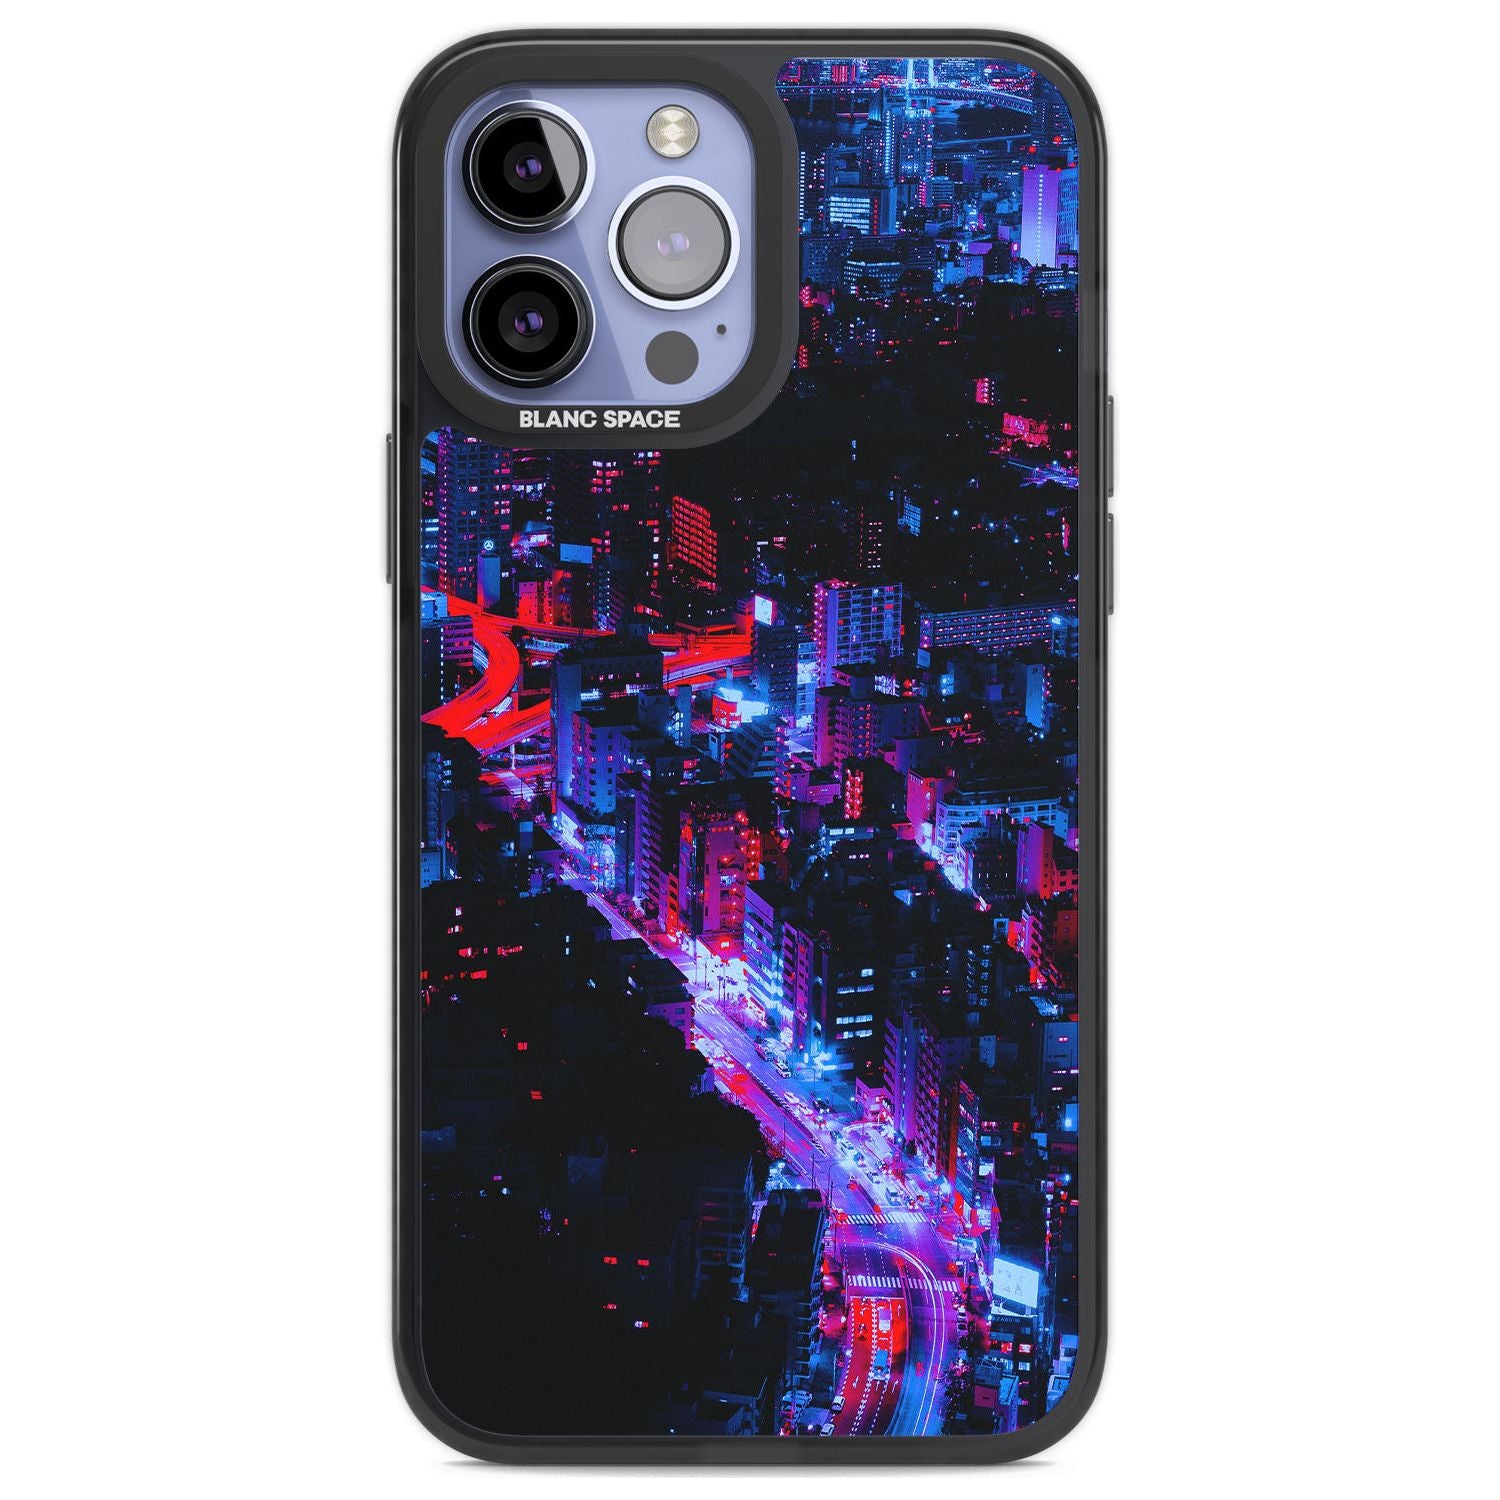 Arial City View - Neon Cities Photographs Phone Case iPhone 13 Pro Max / Black Impact Case,iPhone 14 Pro Max / Black Impact Case Blanc Space